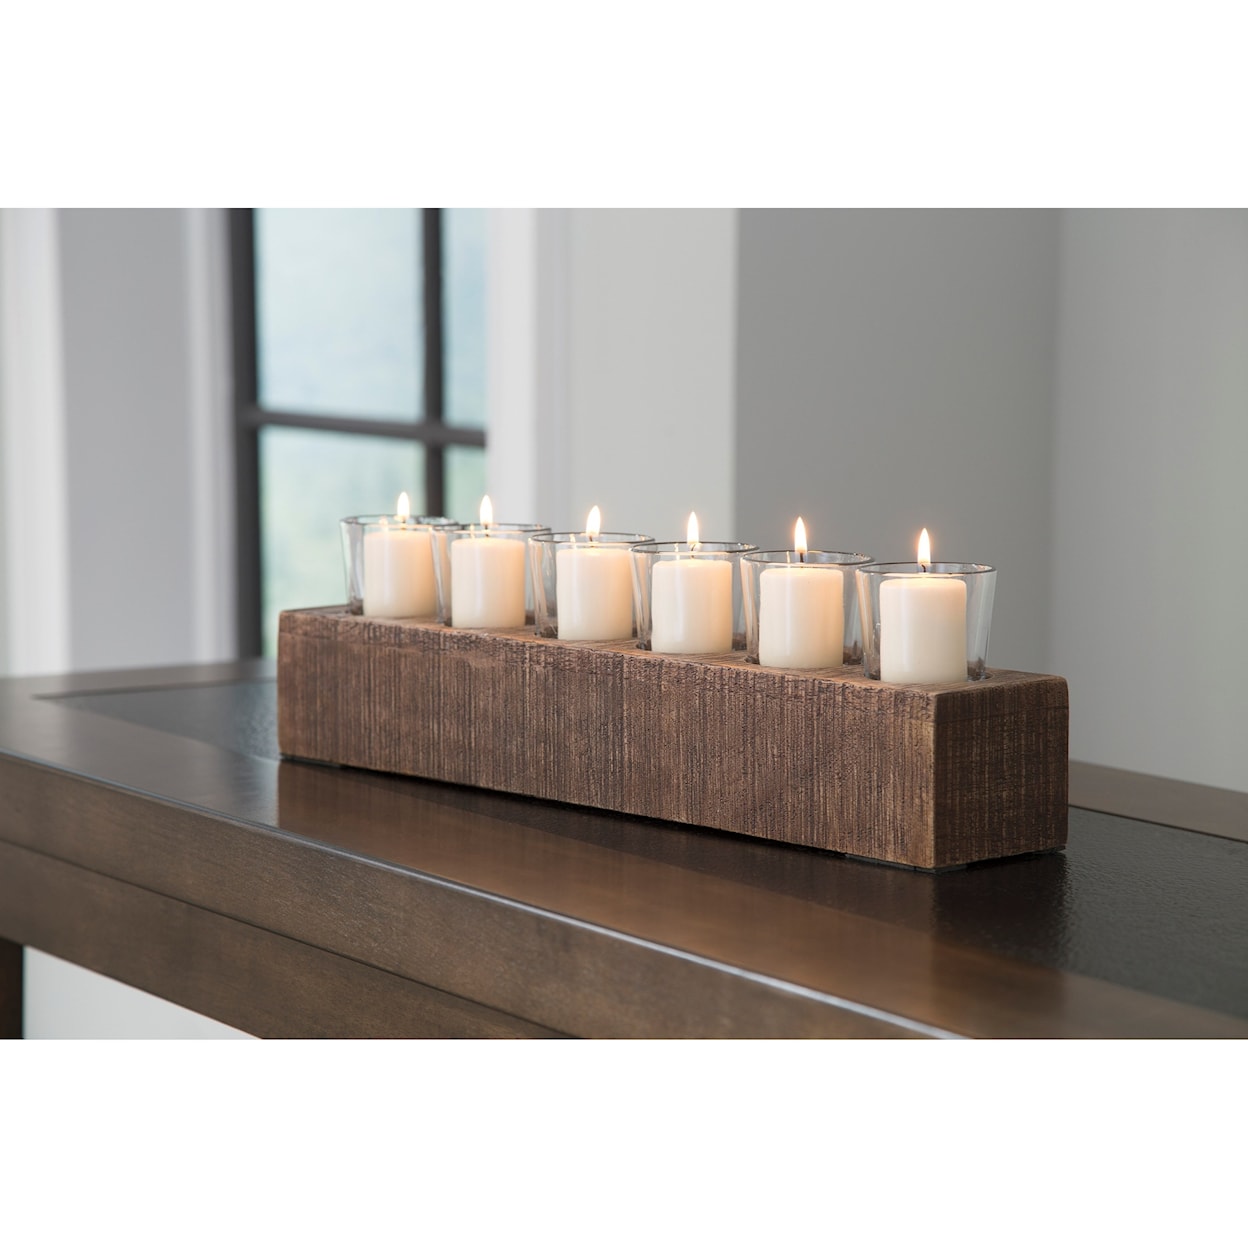 Signature Design by Ashley Accents Cassandra Brown Candle Holder